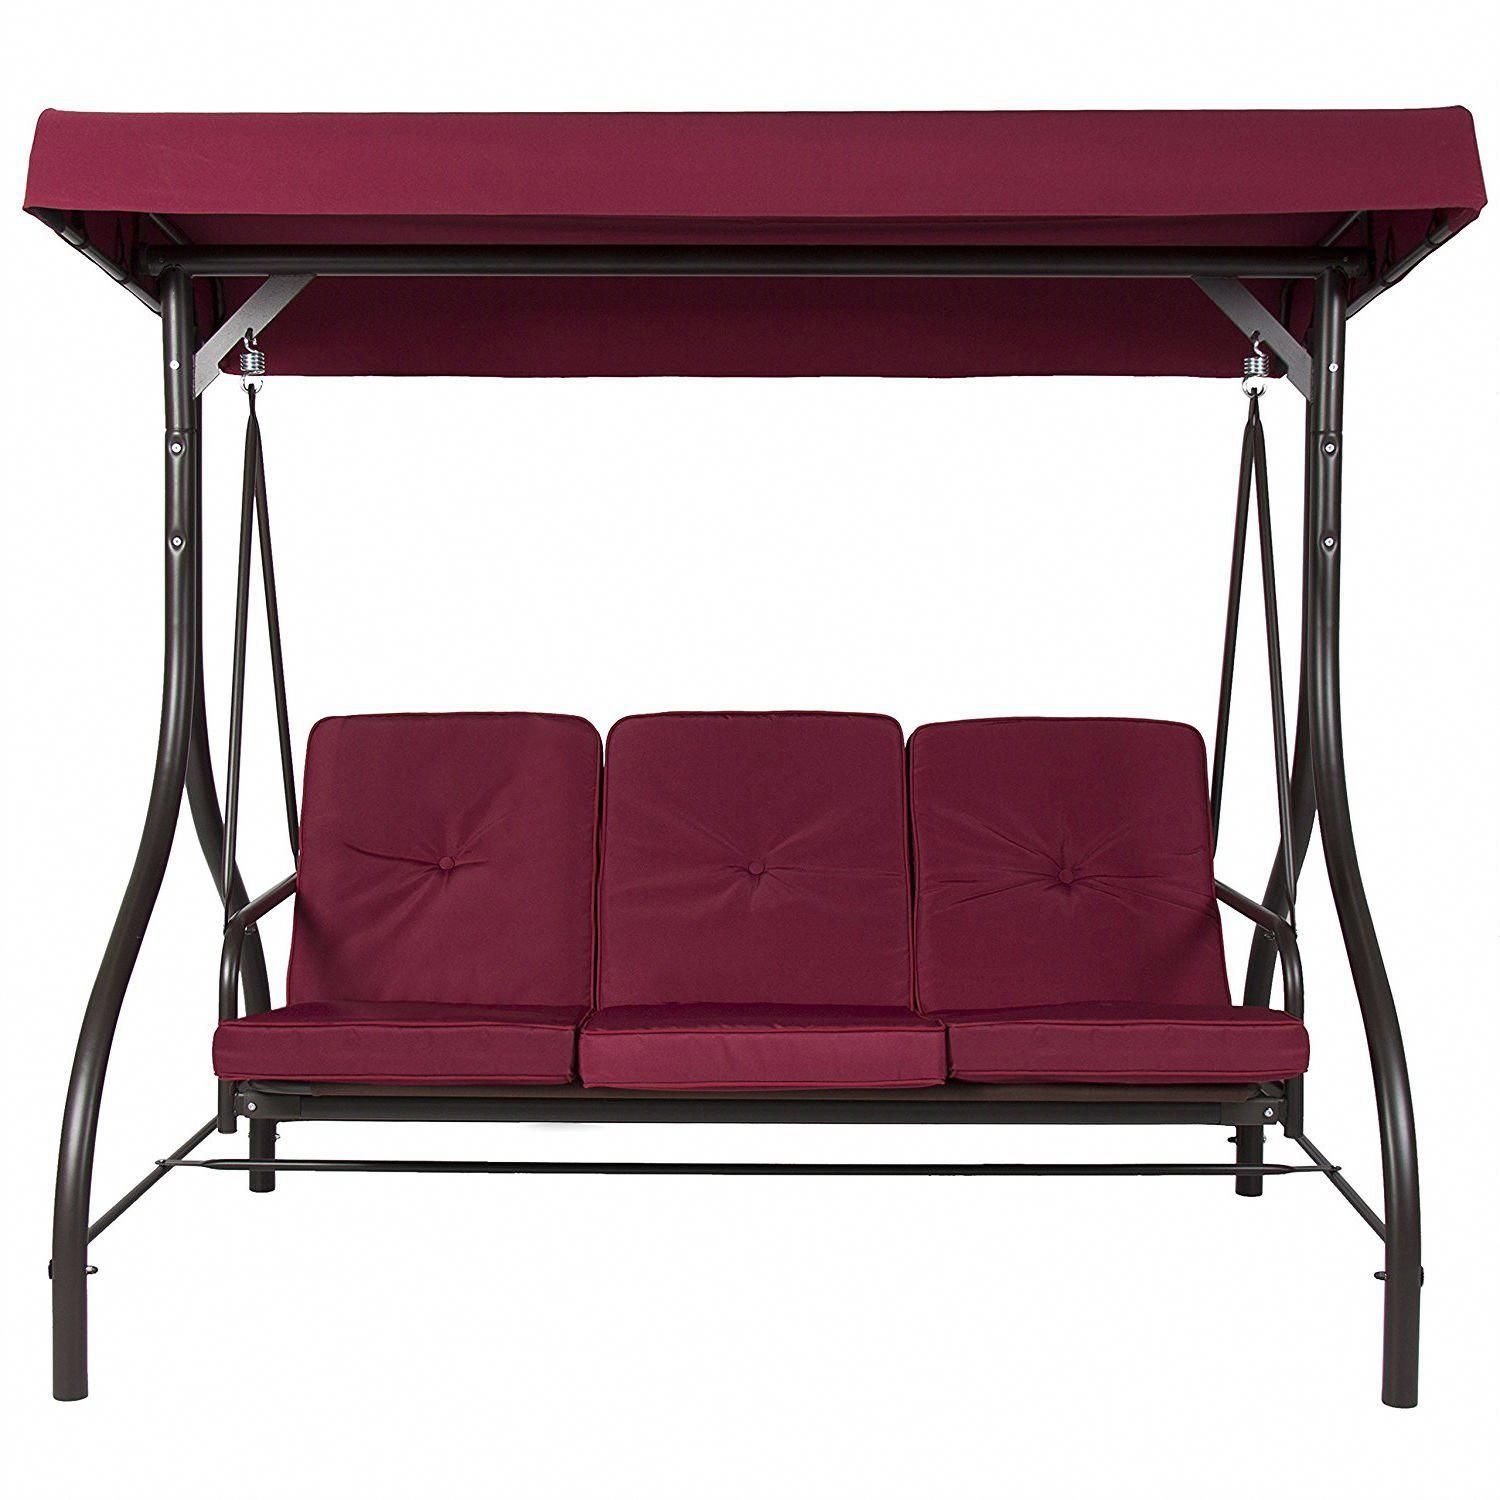 Burgundy Outdoor Patio Deck Porch Canopy Swing With Cushions Pertaining To Outdoor Canopy Hammock Porch Swings With Stand (View 1 of 25)